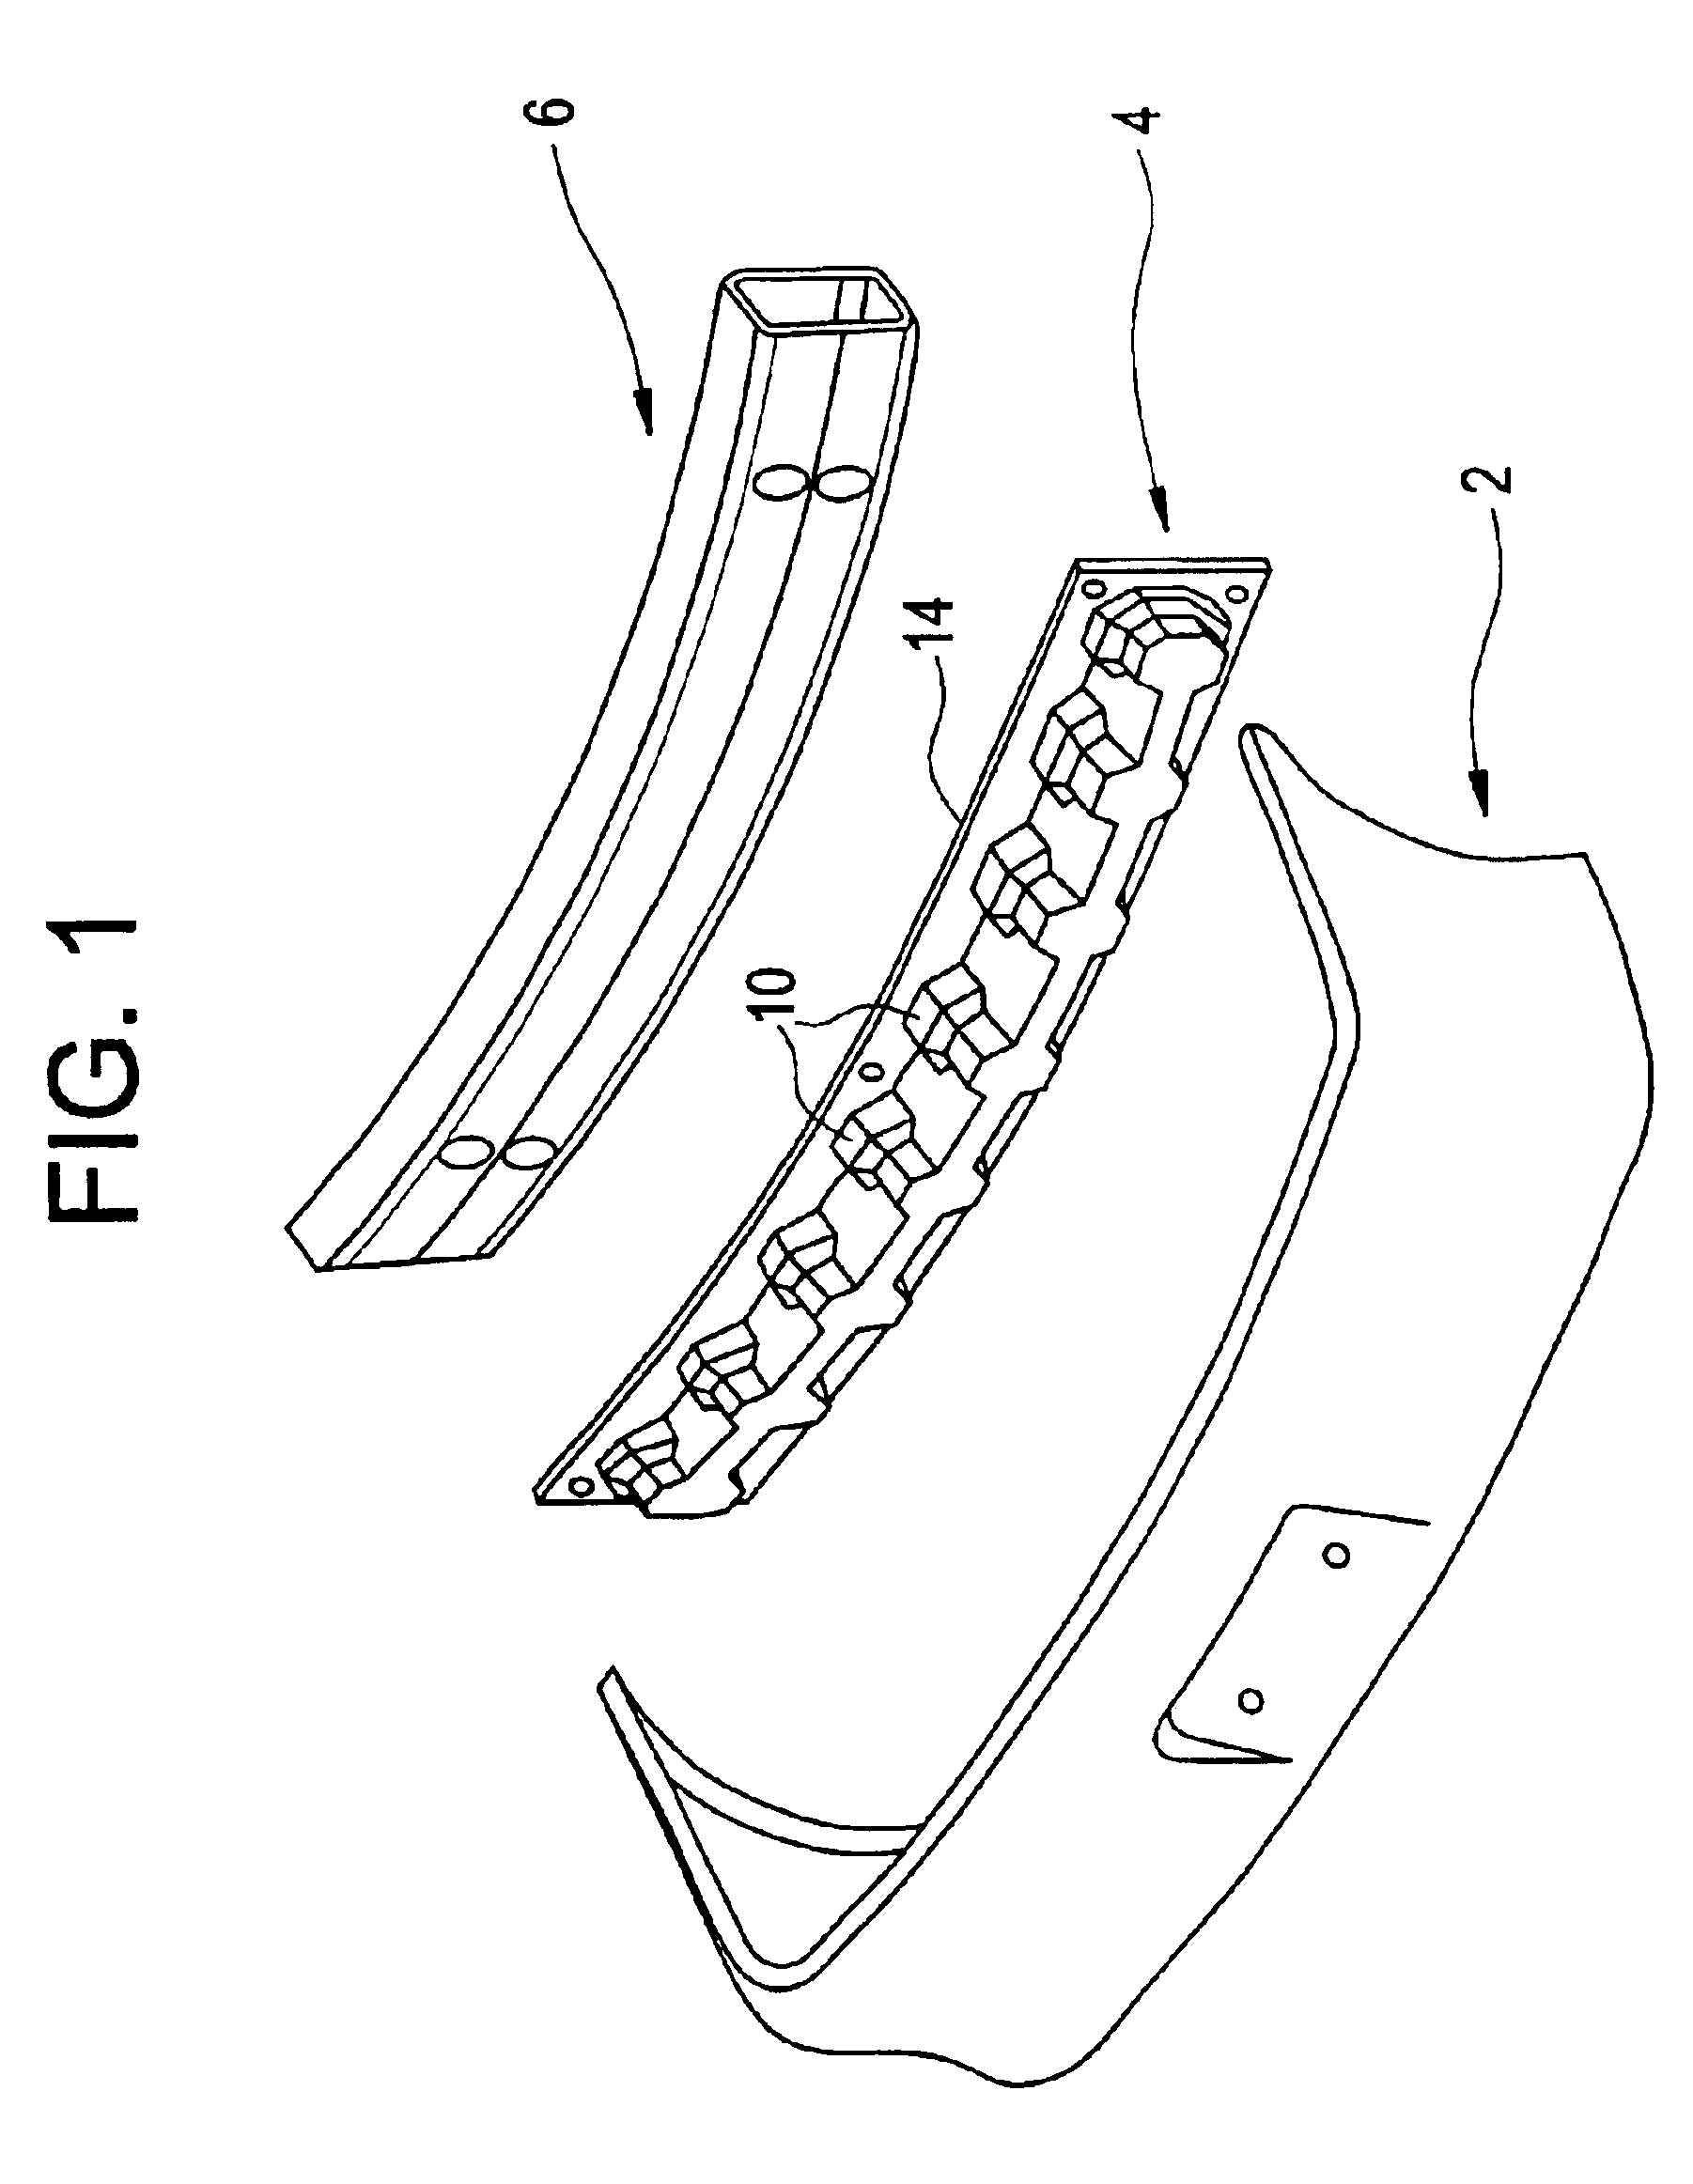 Pedestrian energy absorber for automotive vehicles